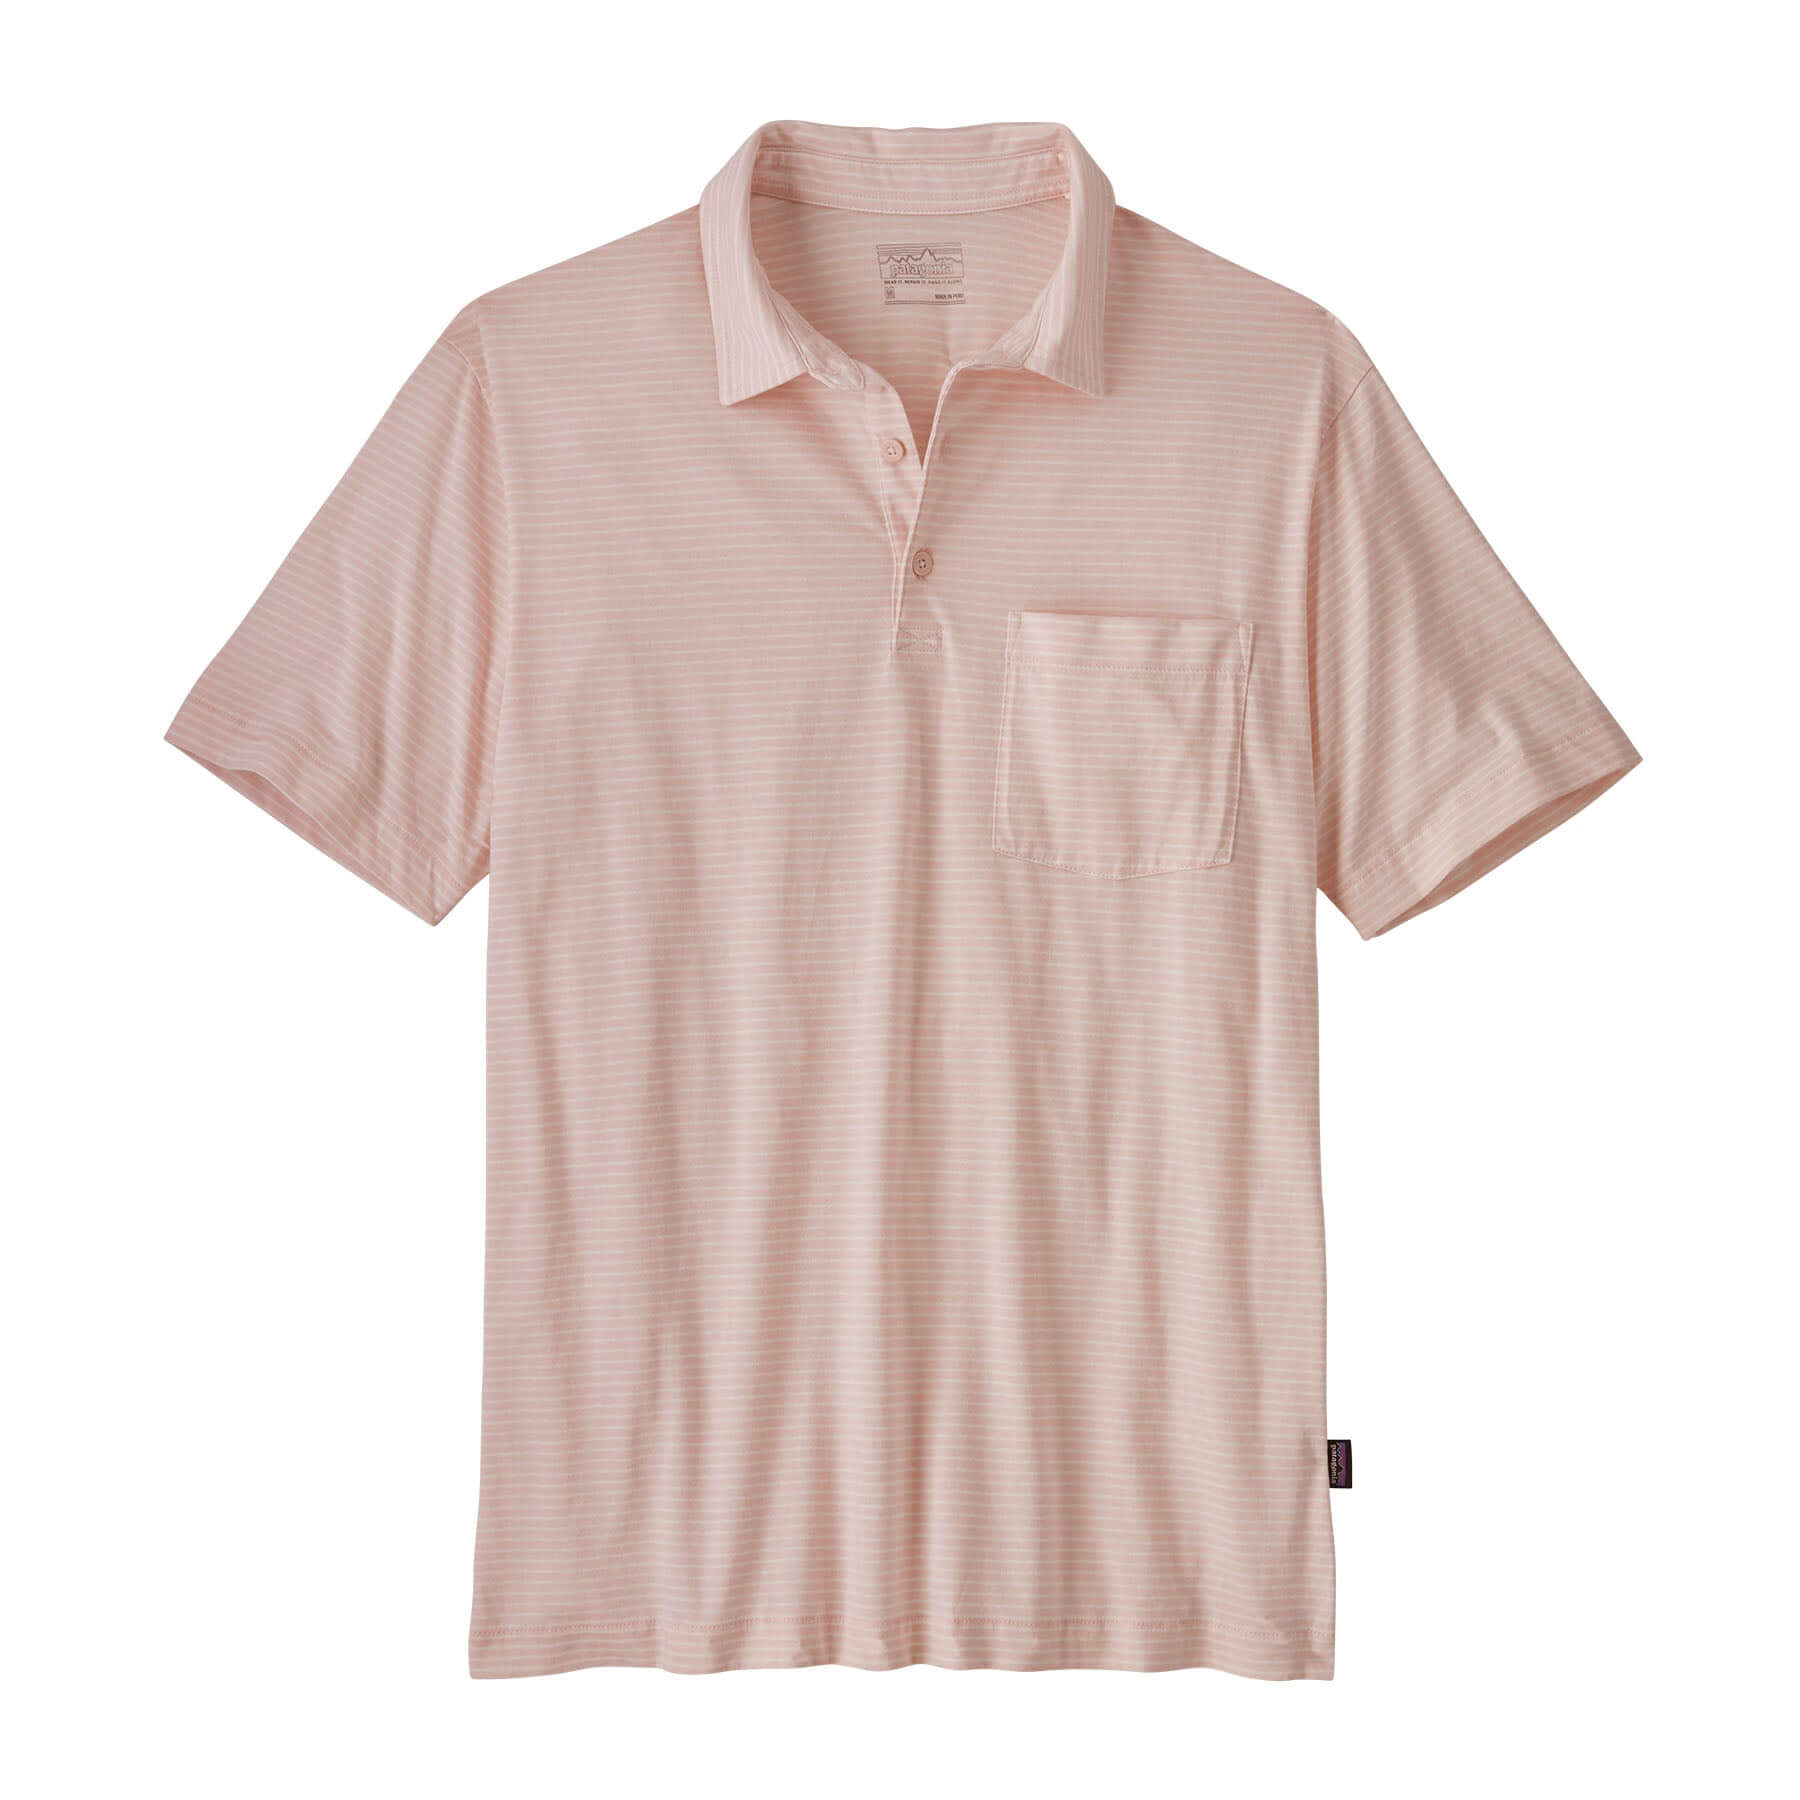 Men's Daily Polo in Seashore: Whisker Pink | Patagonia Bend